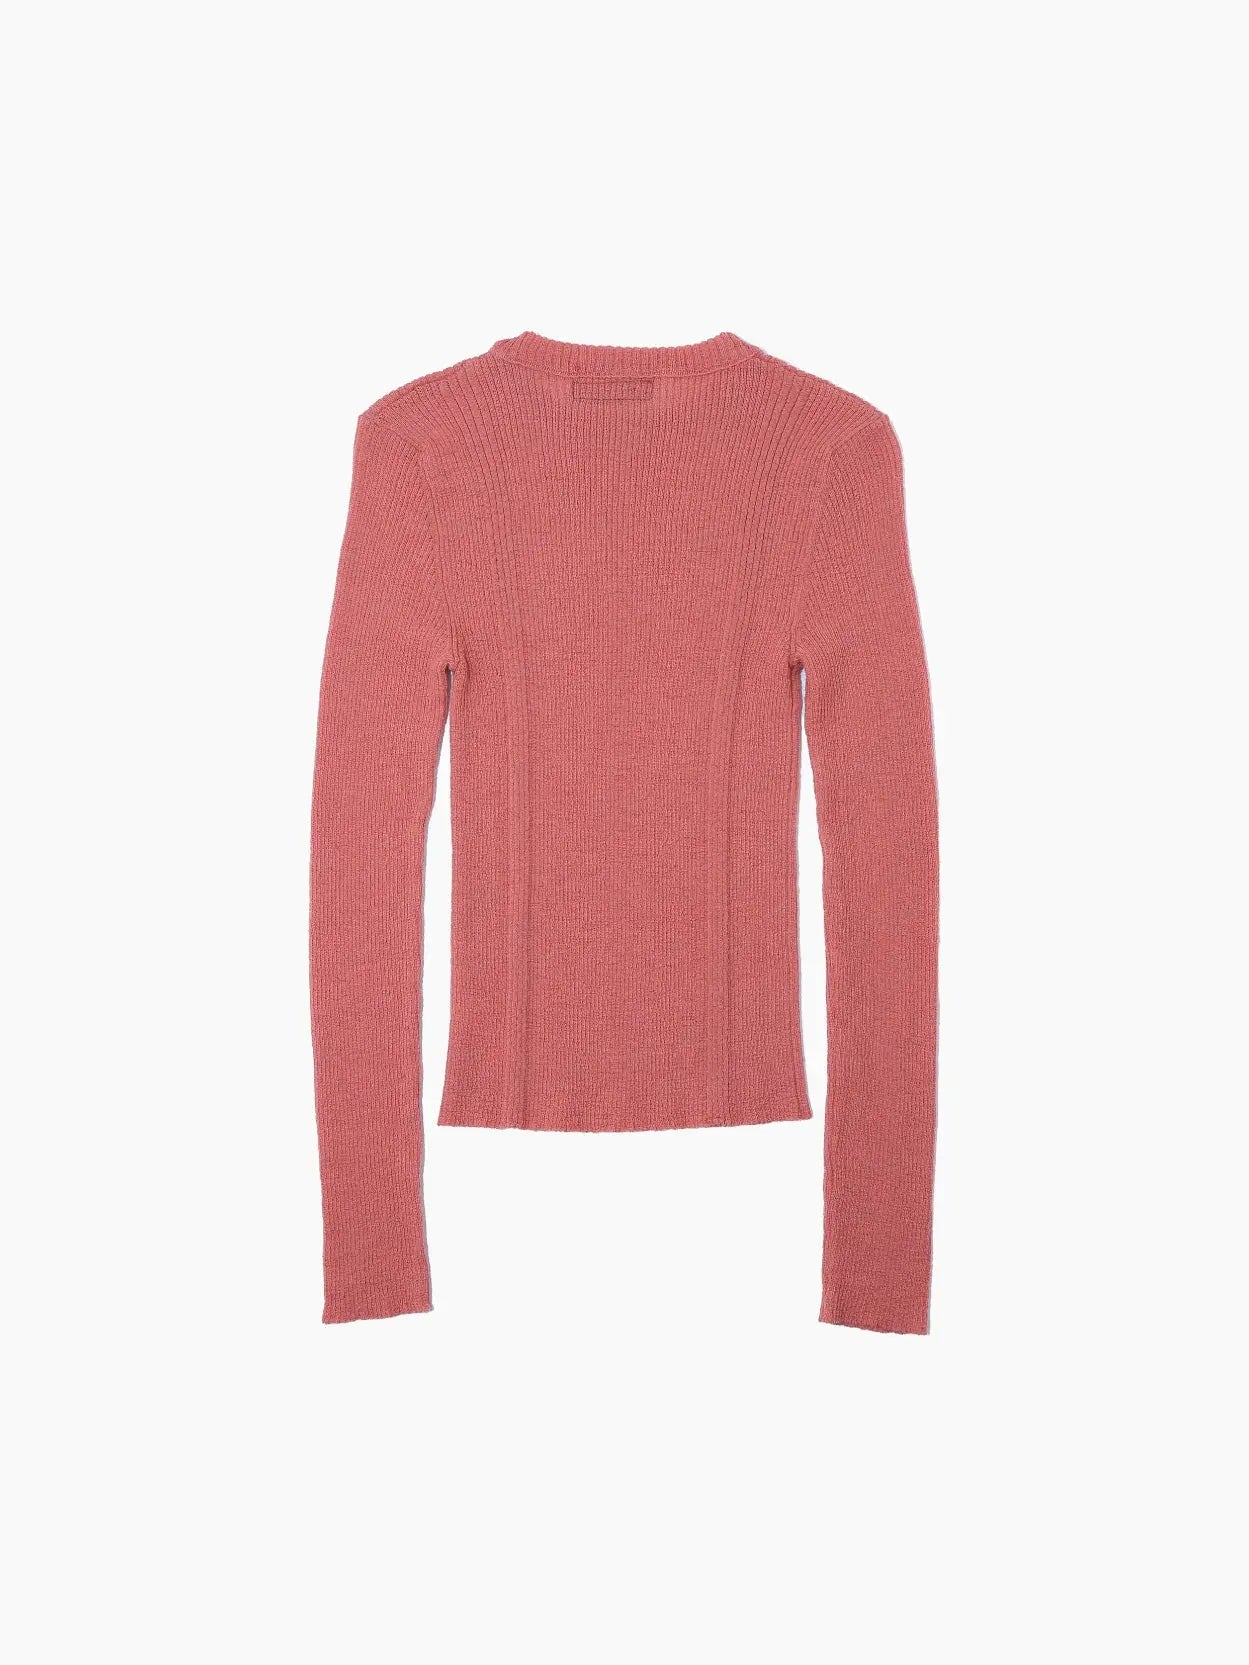 A ribbed, long-sleeve sweater in a dusty rose color is displayed against a white background. The fitted style features vertical ribbing patterns for texture and a round neckline. A small fabric tag is visible on the inside back of the neckline, available exclusively at Bassalstore in Barcelona. Product: Masla Long Sleeve Coral by Bielo.